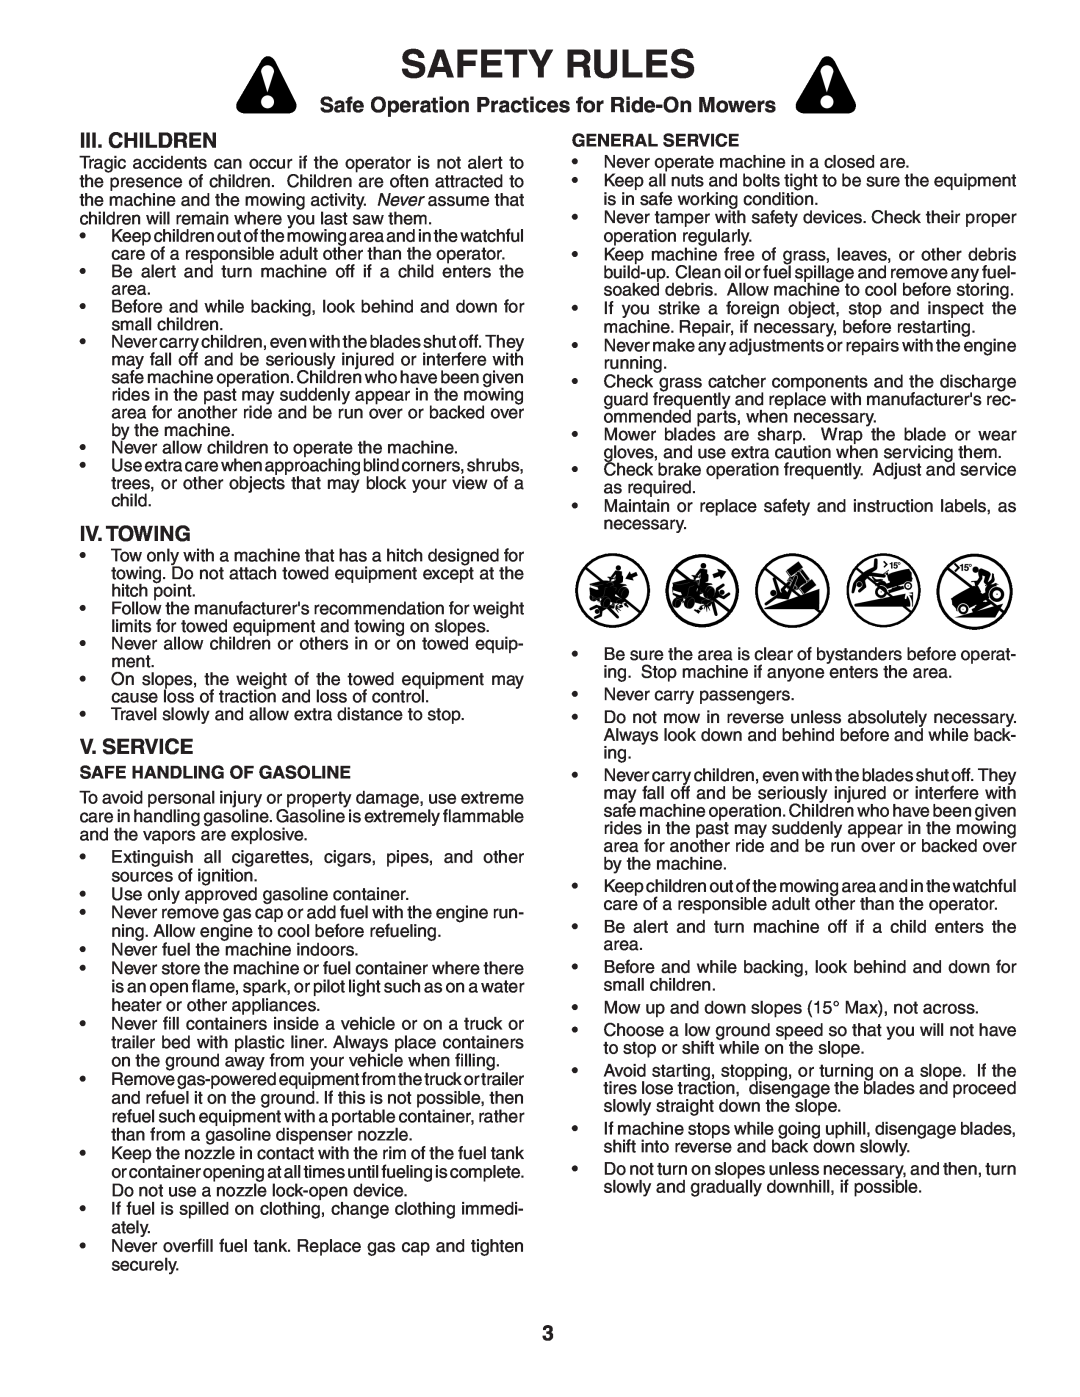 Poulan 403444 manual Iii. Children, Iv. Towing, V. Service, Safety Rules, Safe Operation Practices for Ride-On Mowers 